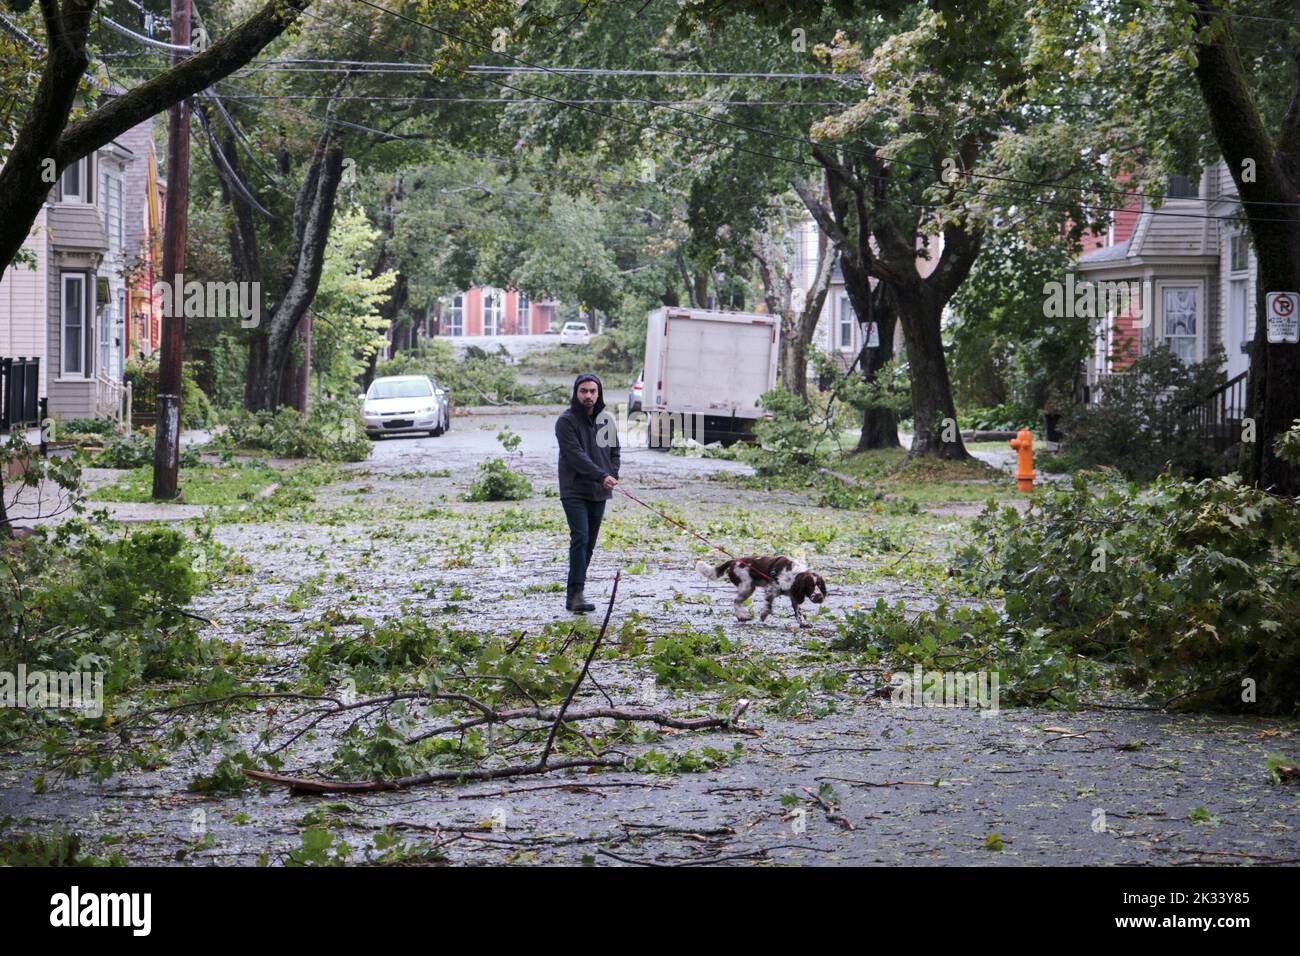 Halifax, Nova Scotia, Canada. September 24th, 2022. Tree damages all over the street of North End area of Halifax following the passage of Hurricane Fiona. The Hurricane with winds up to 135 km/h in the area left considerable tree damages, and major damage to the power grid with an estimated 80% of population of province without power this morning, but the area still avoid some of the major damages that hit the rest of the province. Credit: meanderingemu/Alamy Live News Stock Photo